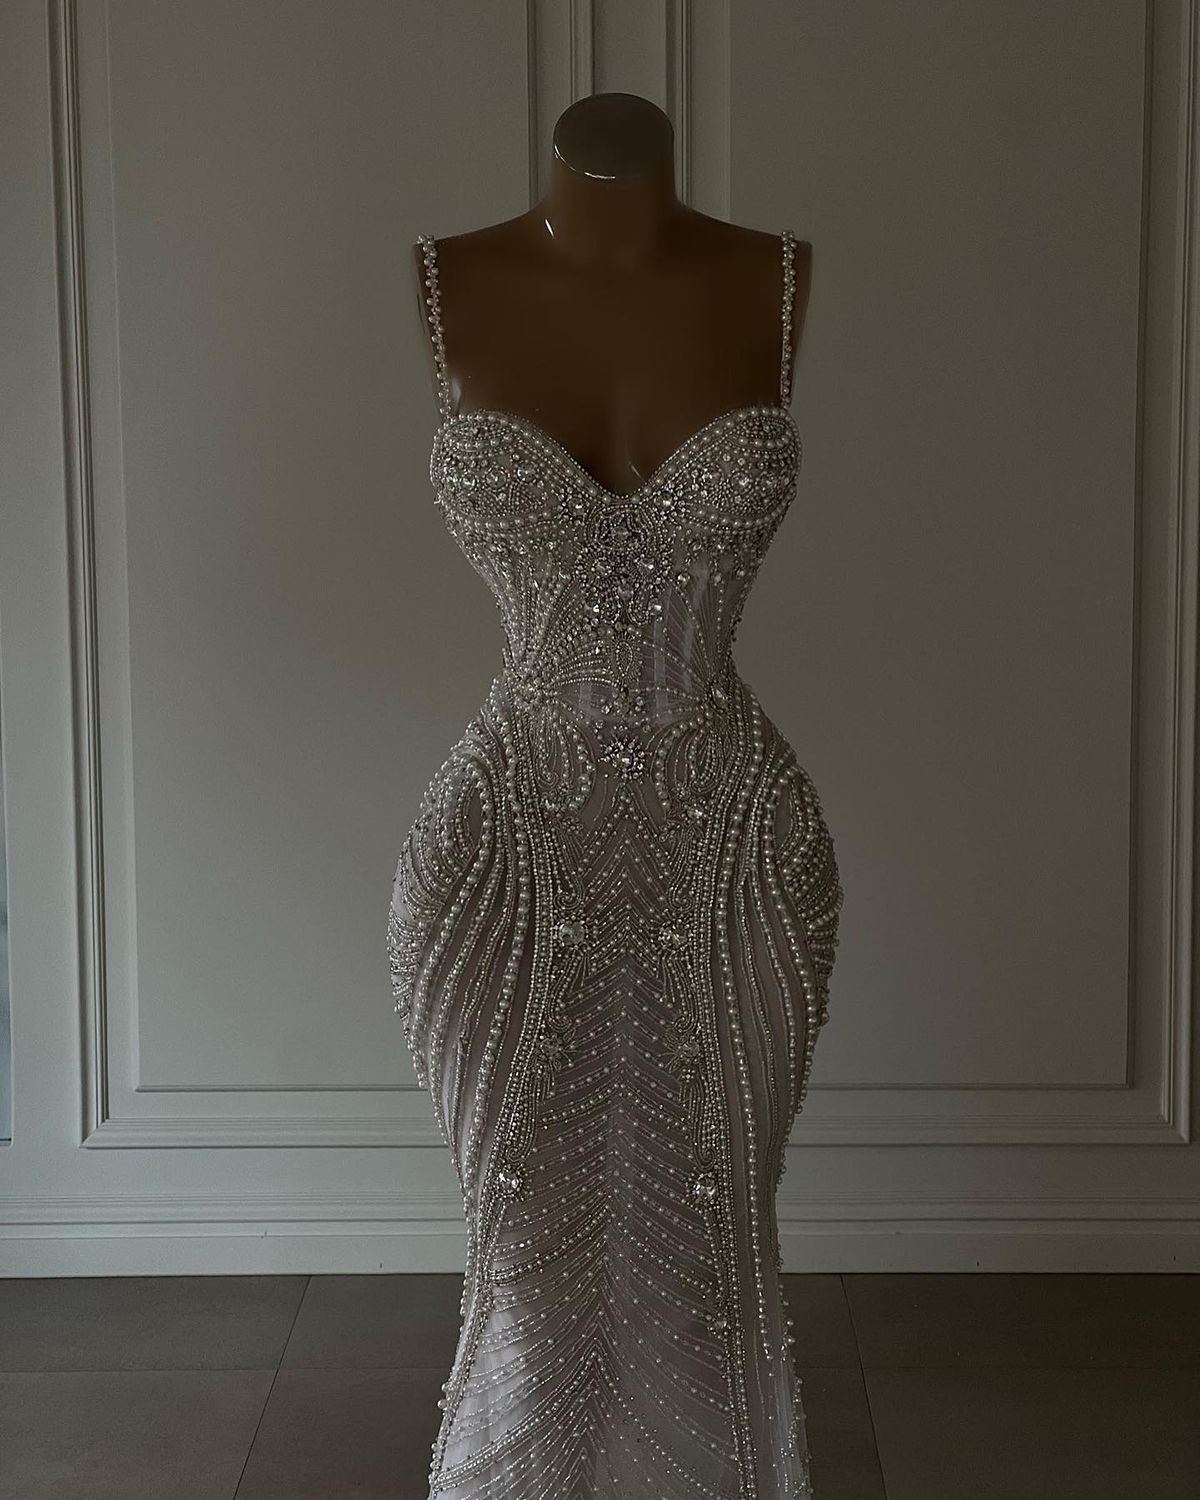 Exquisite Mermaid Prom Dresses Sleeveless V Neck Straps Appliques Sequins Beaded Floor Length 3D Lace Diamonds Evening Dress Plus Size Bridal Gowns Custom Made